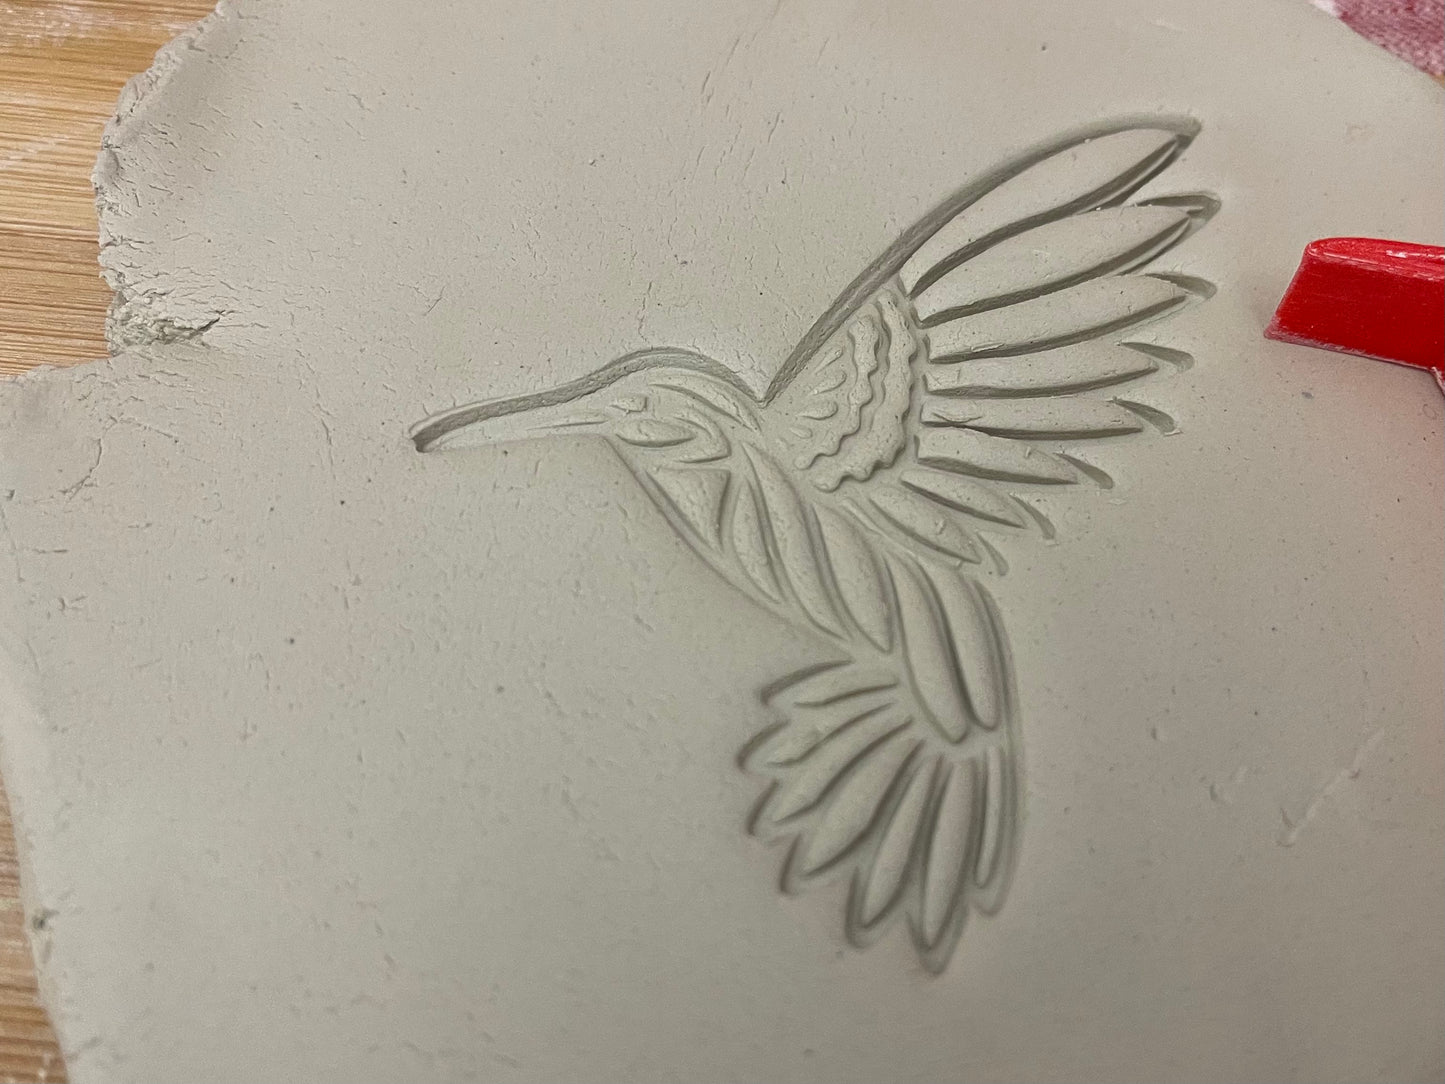 Hummingbird Pottery Stamp - 3D Printed Multiple Sizes Available